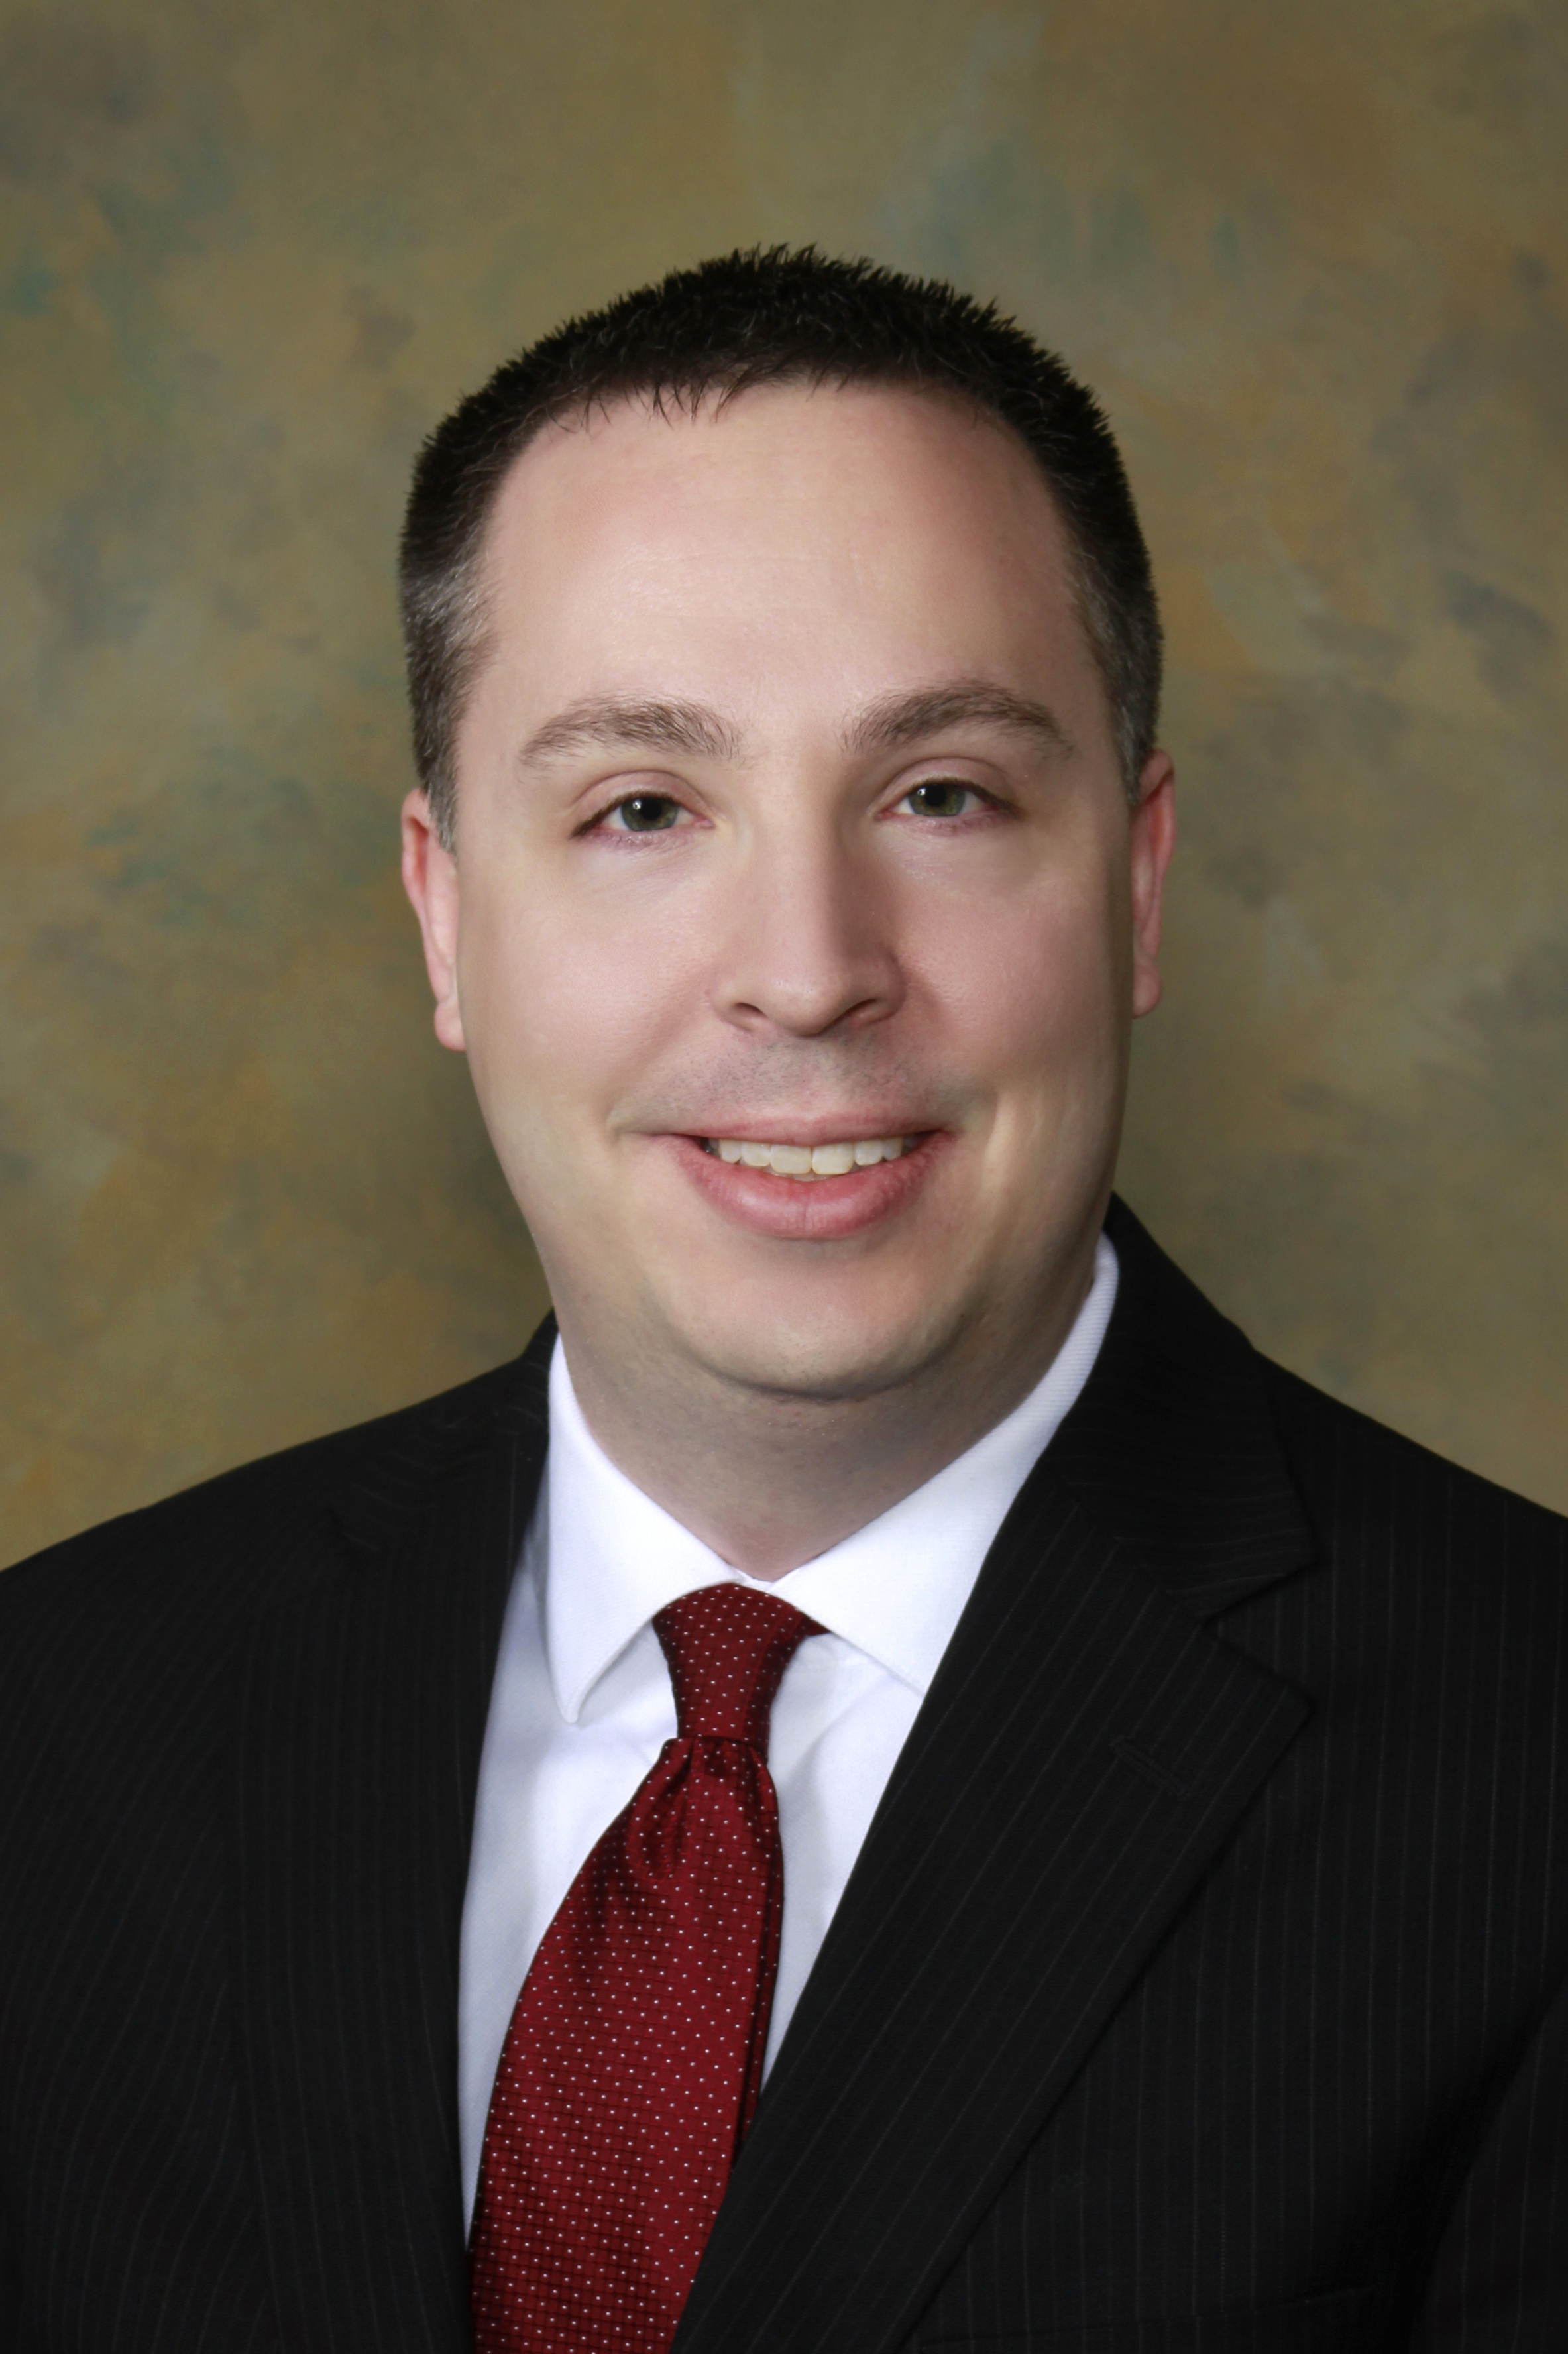 DUI Attorney Andrew Hoverman - Frederick County, MD - DUIAttorney.com